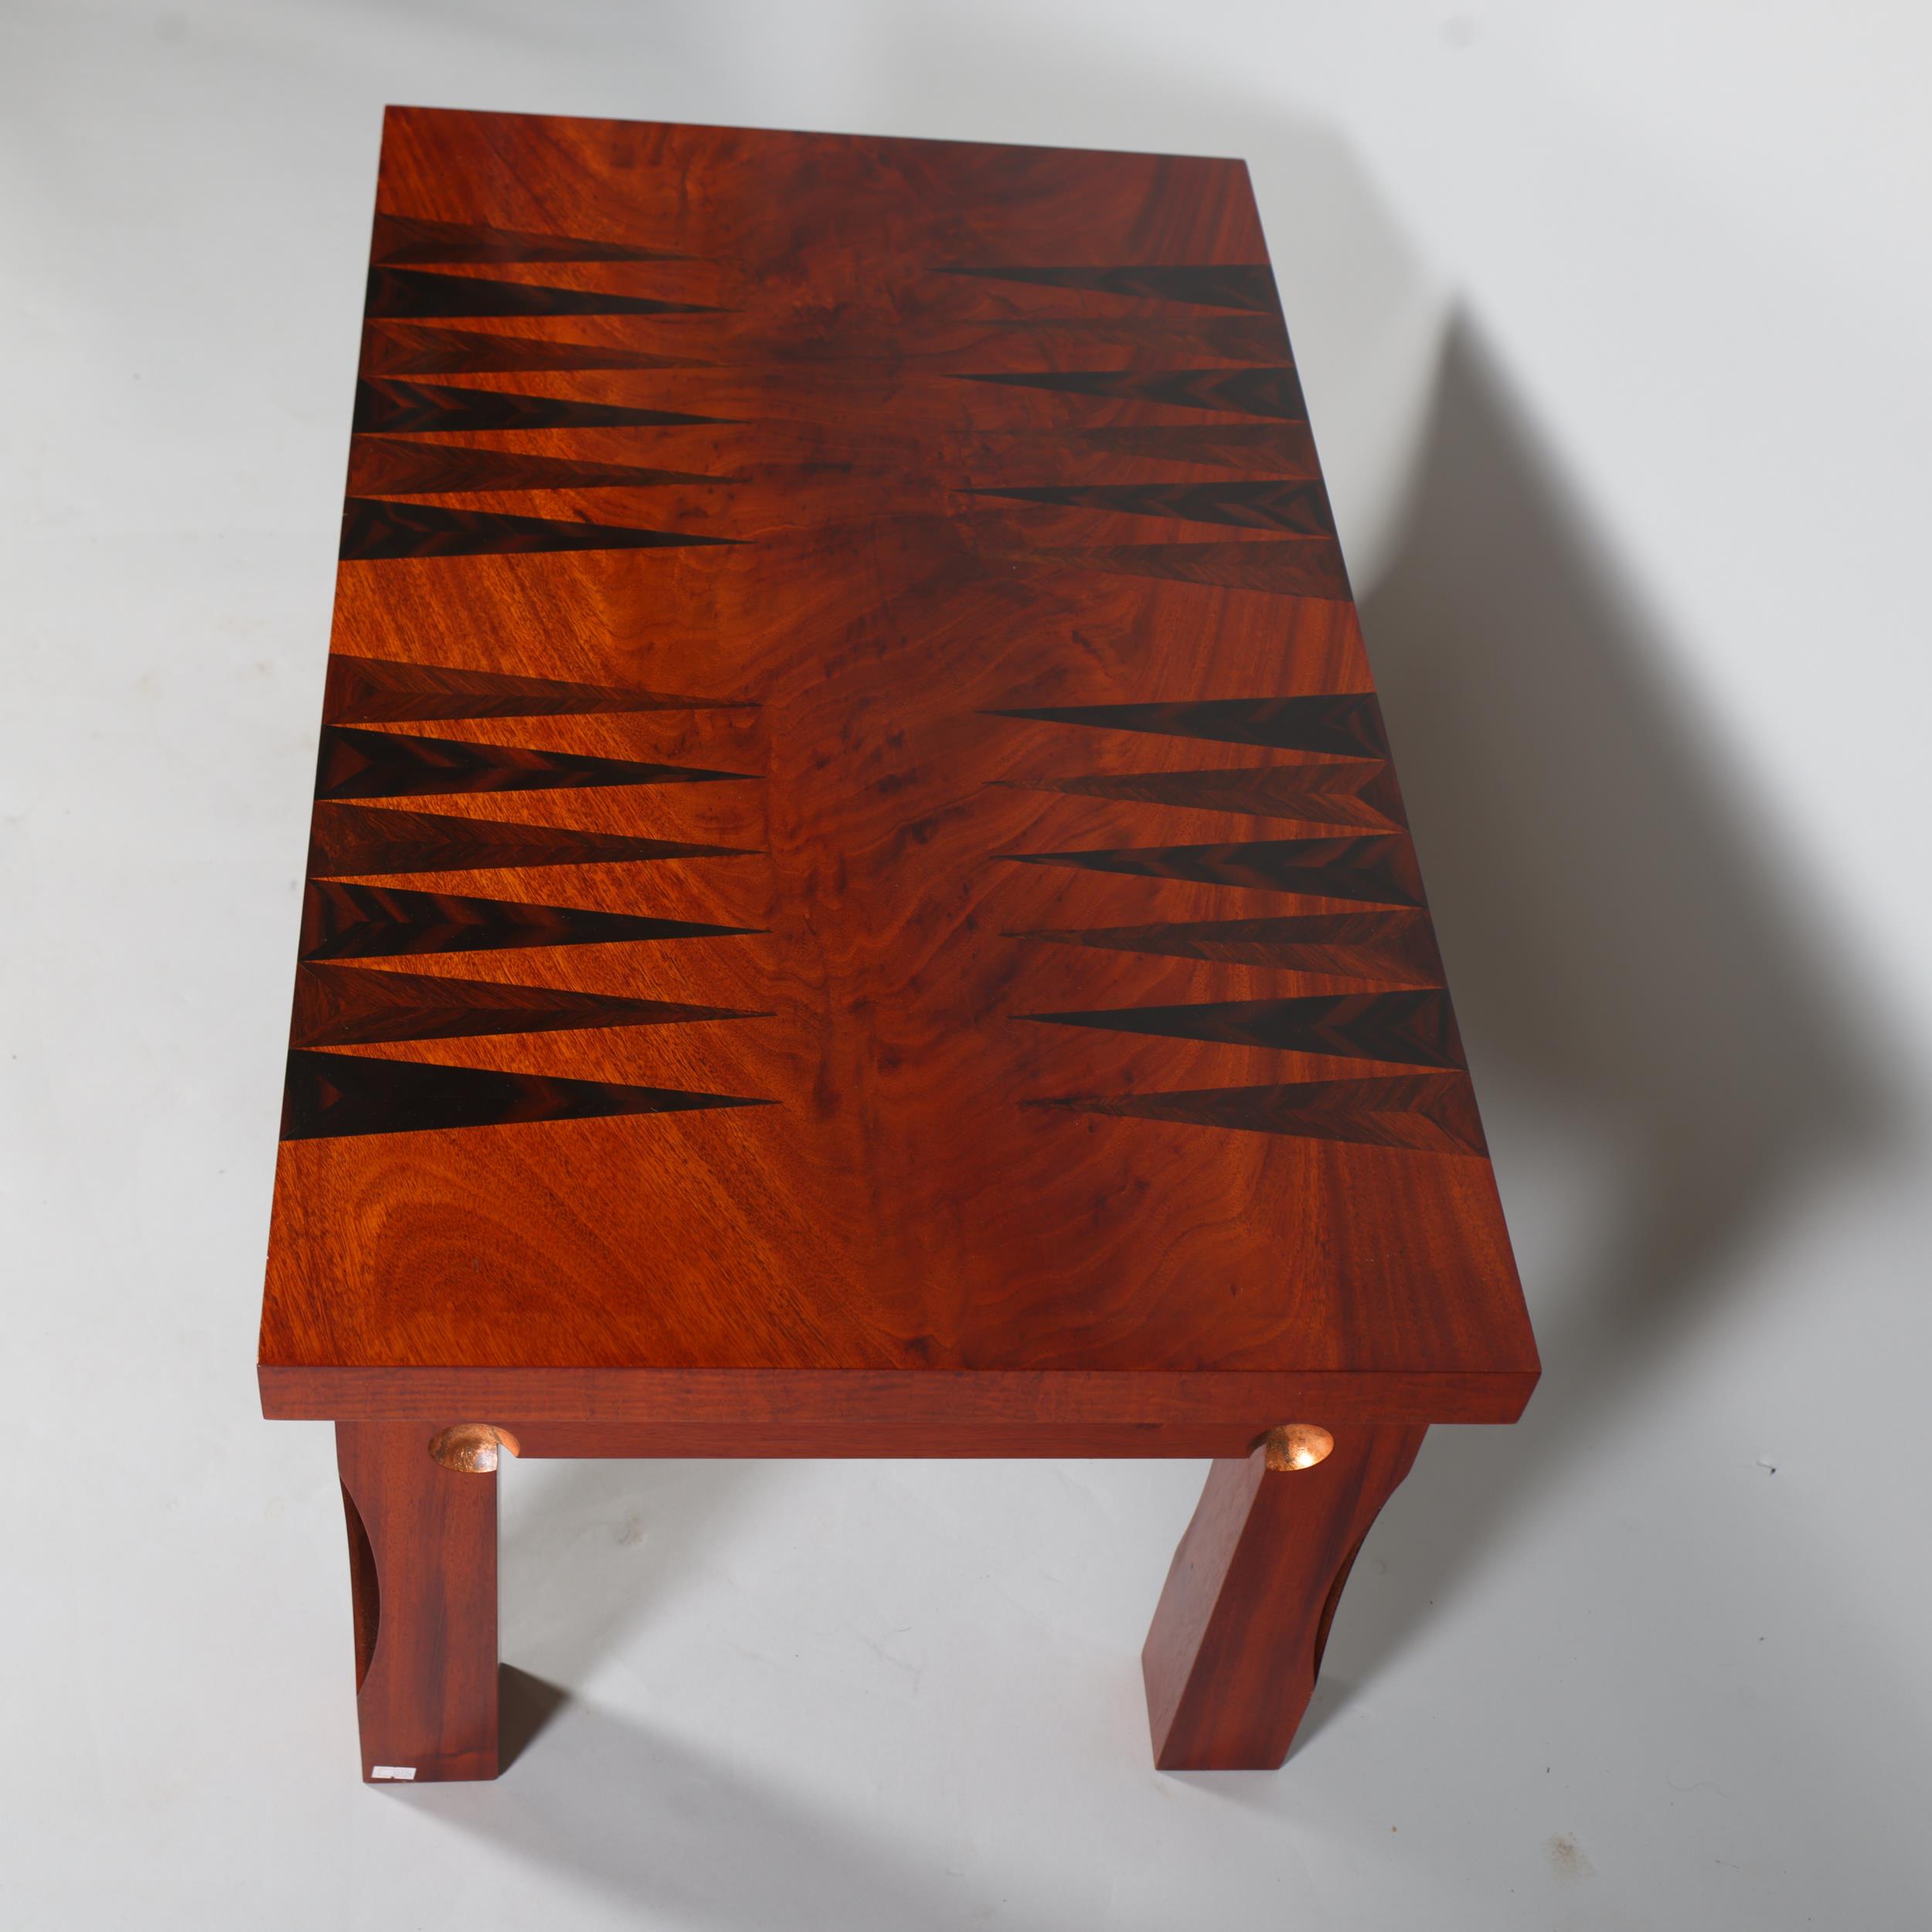 MARK BEVERTON, a contemporary craftsman made coffee table with inlaid backgammon board, with - Image 3 of 3